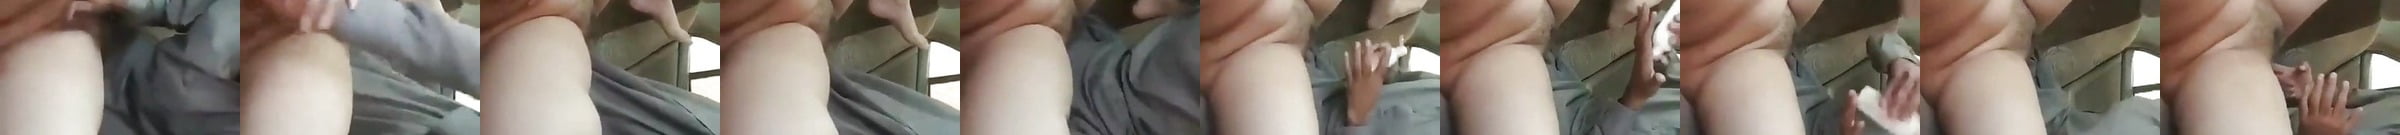 Featured Uber Driver Porn Videos 20 Xhamster